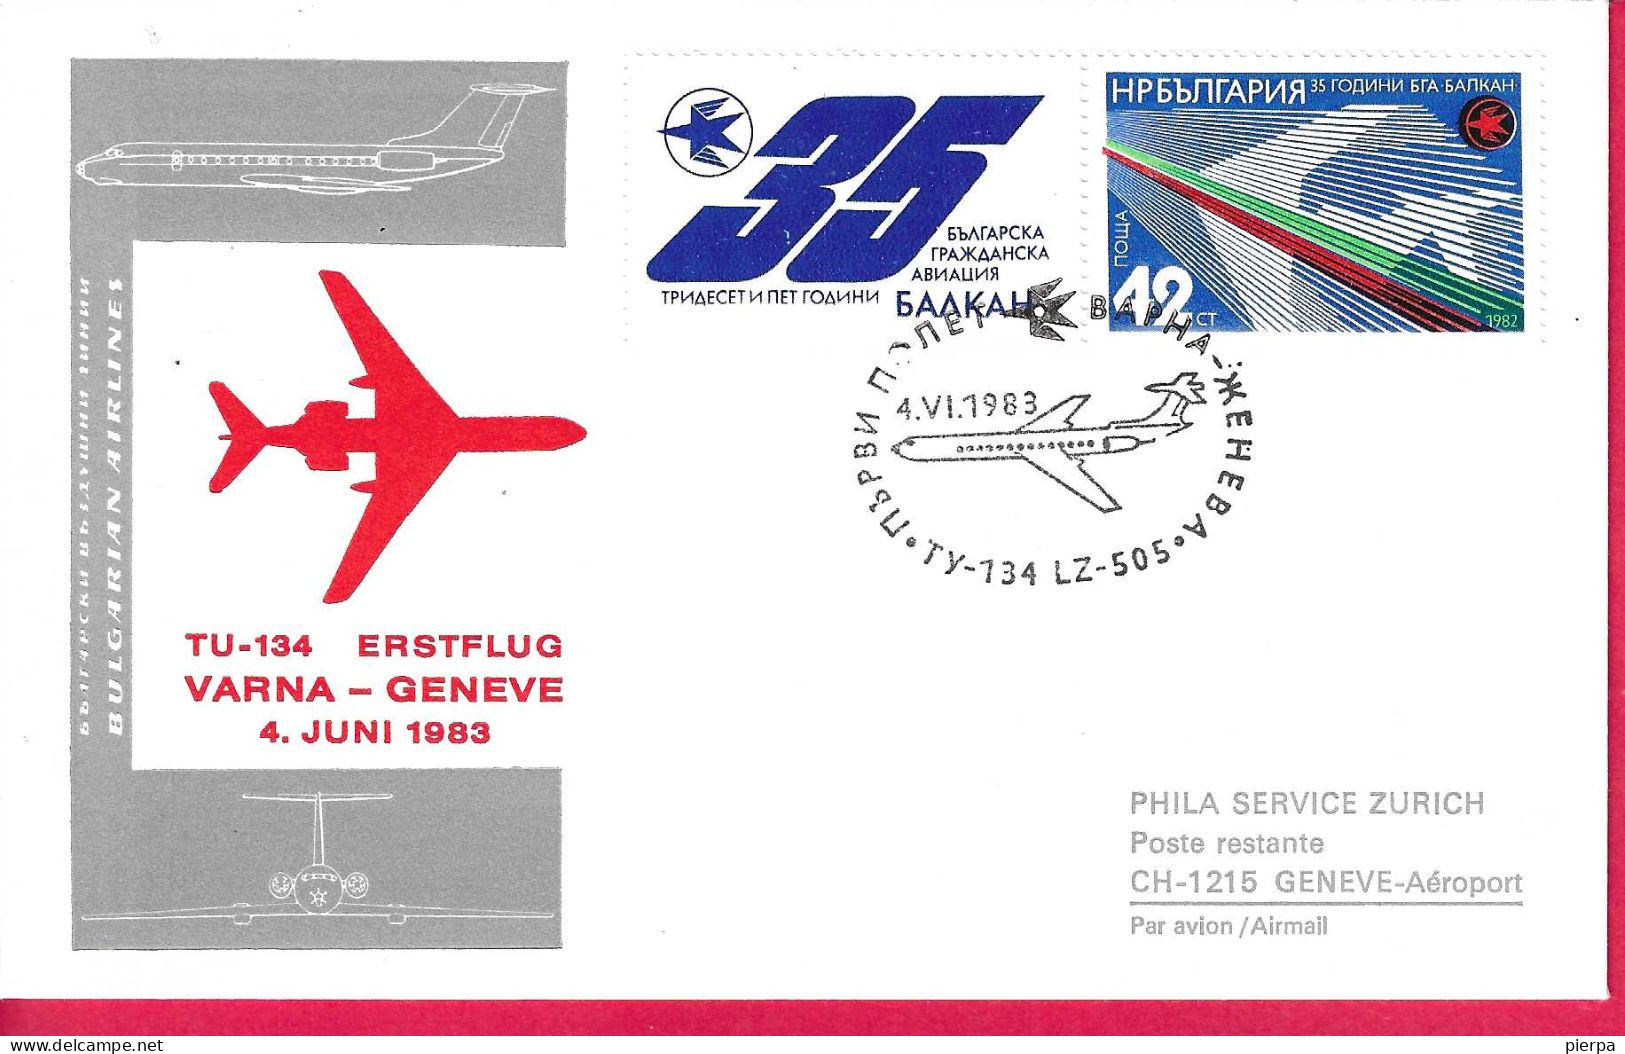 BULGARIA - FIRST FLIGHT TU-134 FROM VARNA TO GENEVE * 4.VI.1983* ON OFFICIAL COVER - Corréo Aéreo